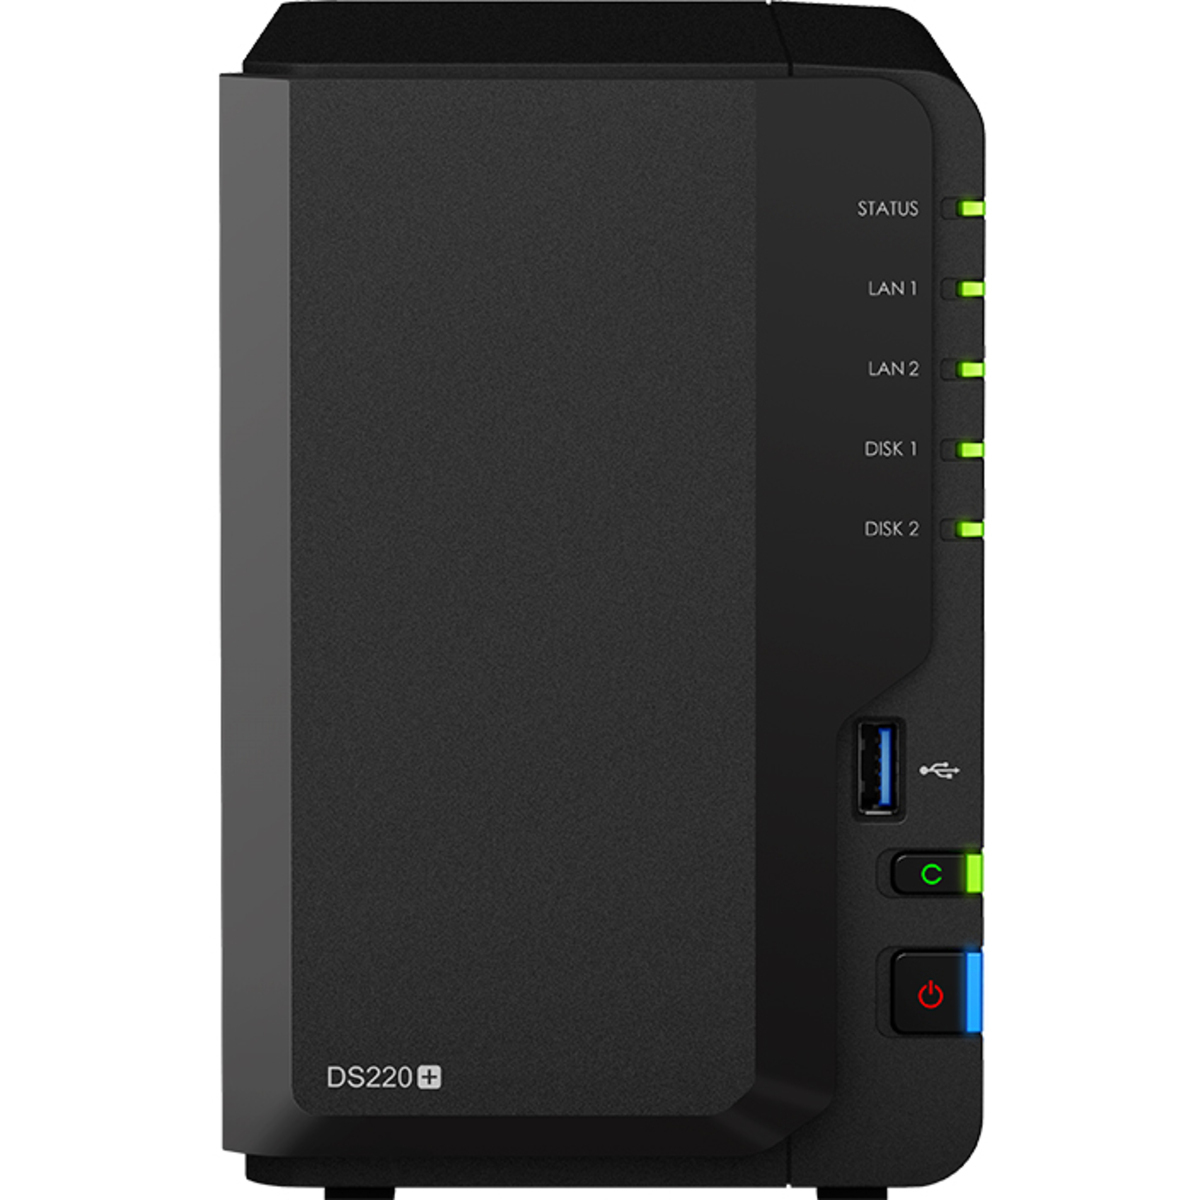 buy $1059 Synology DiskStation DS220+ 32tb Desktop NAS - Network Attached Storage Device 2x16000gb Toshiba Enterprise Capacity MG08ACA16TE 3.5 7200rpm SATA 6Gb/s HDD ENTERPRISE Class Drives Installed - Burn-In Tested - FREE RAM UPGRADE - nas headquarters buy network attached storage server device das new raid-5 free shipping usa DiskStation DS220+